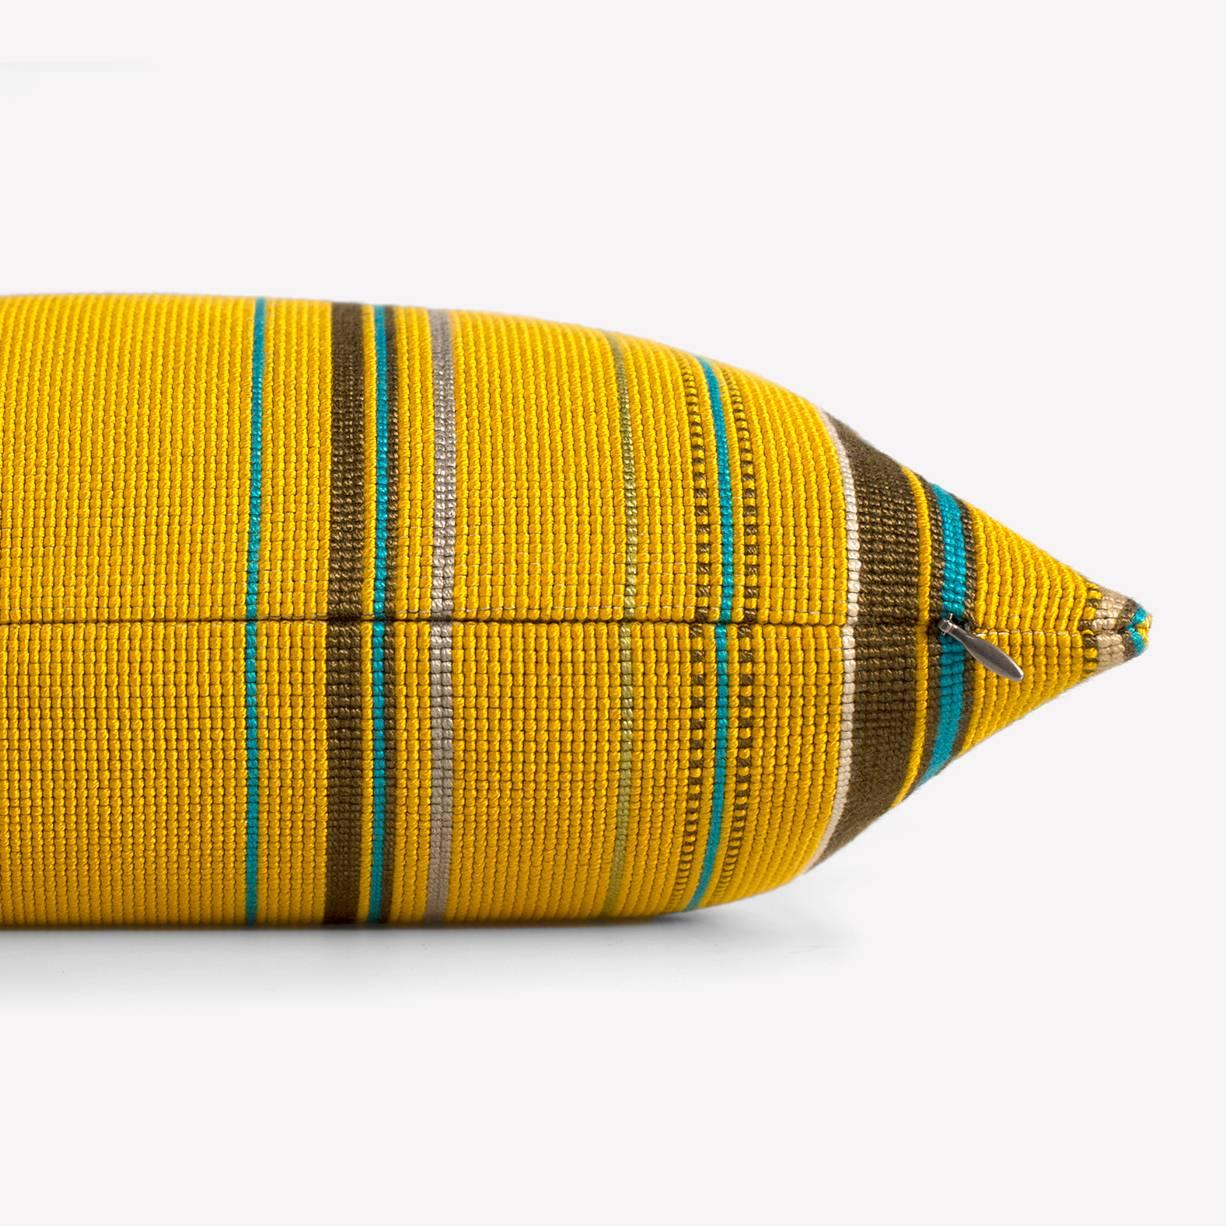 Maharam Pillow
Point by Paul Smith 
014 Citrus

A study in variegation, Point by Paul Smith explores scale, density, rhythm, color, and proportion in an imaginative display of British fashion. Created in collaboration with the Maharam Design studio,